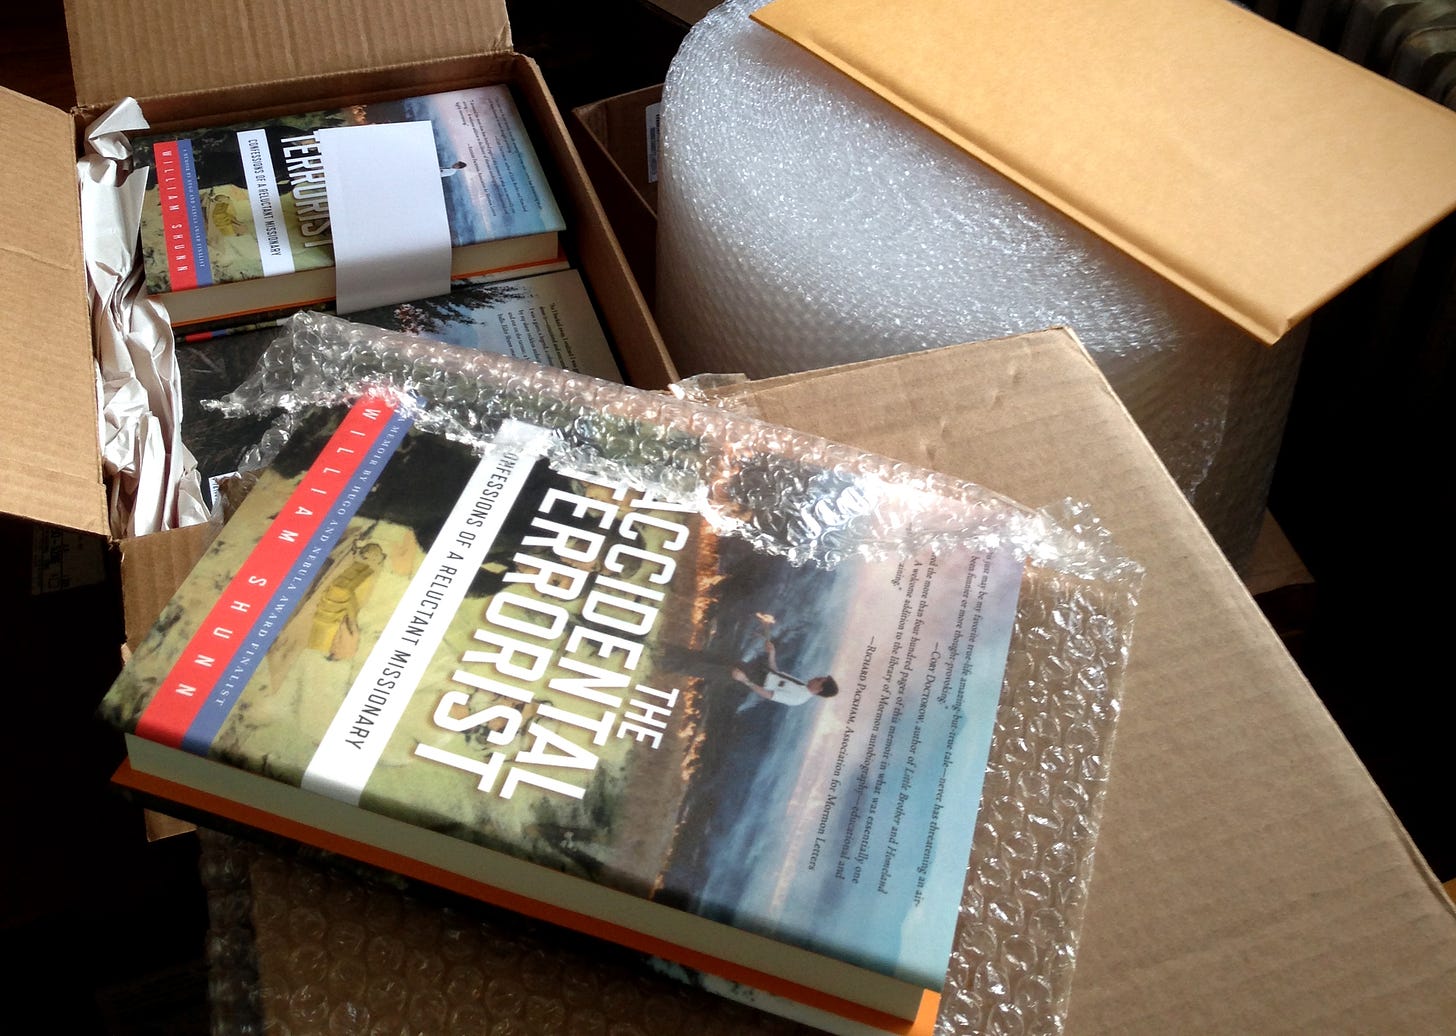 A hardcover copy of The Accidental Terrorist half-wrapped in bubble wrap sits next to an open carton of more copies of the book, with mailing supplies nearby.